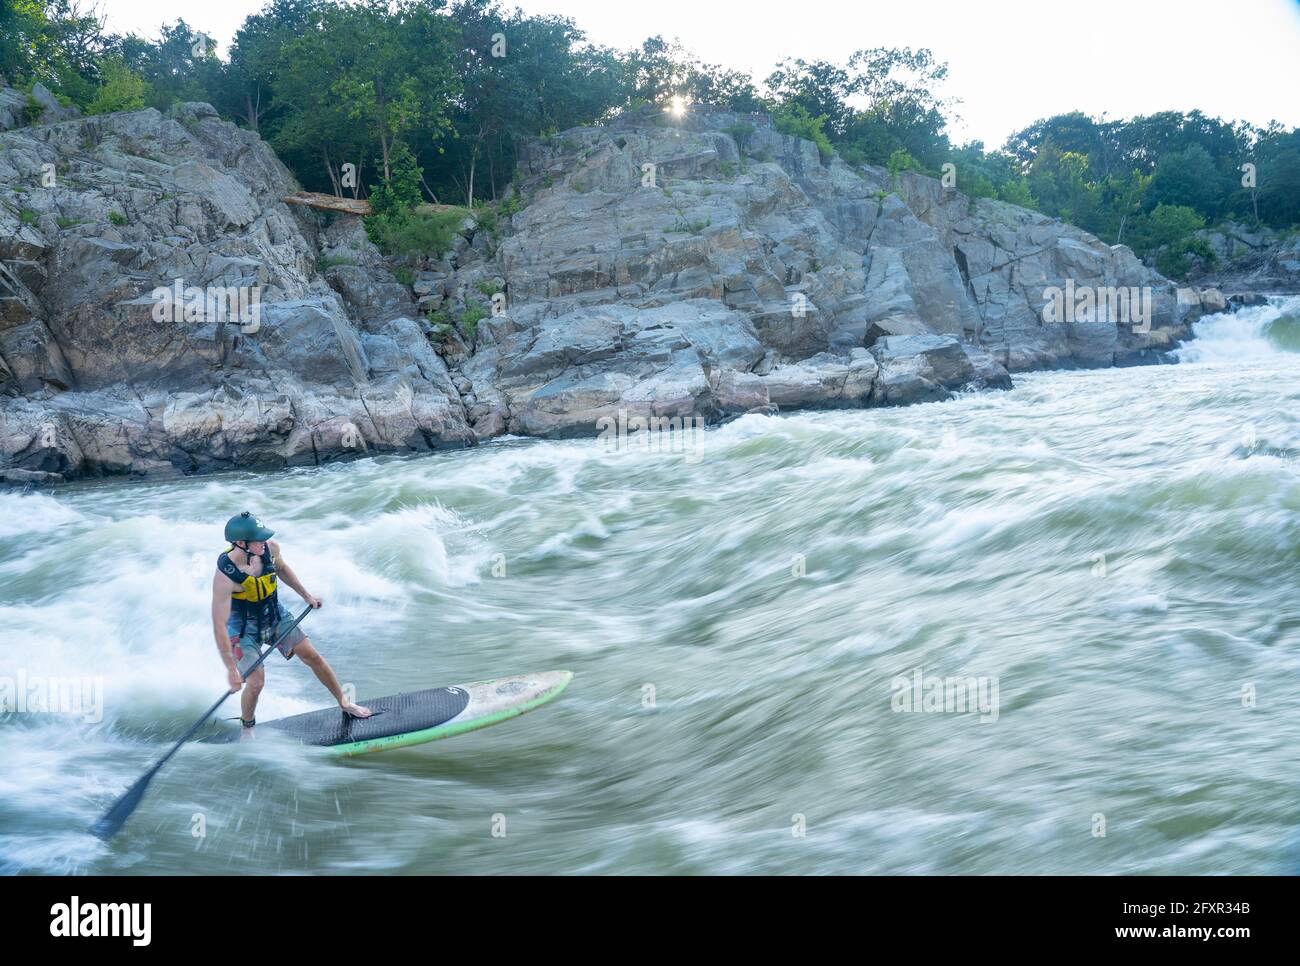 Ian Brown stand up paddle surfs challenging whitewater below Great Falls of the Potomac River, border of Maryland and Virginia, USA, North America Stock Photo